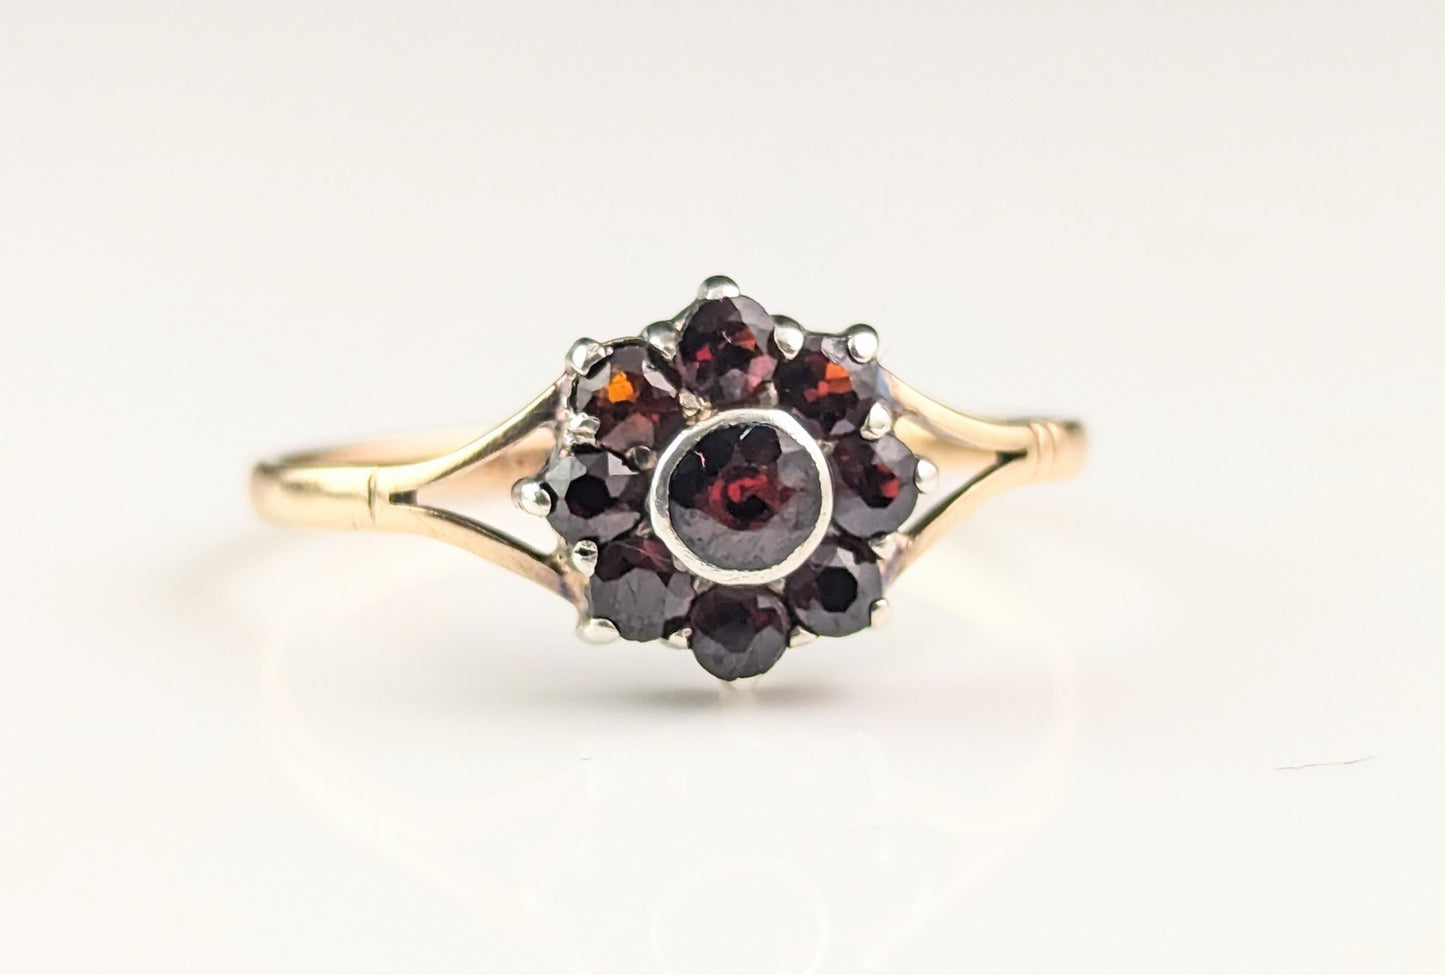 Antique Garnet flower cluster ring, 9ct gold and silver